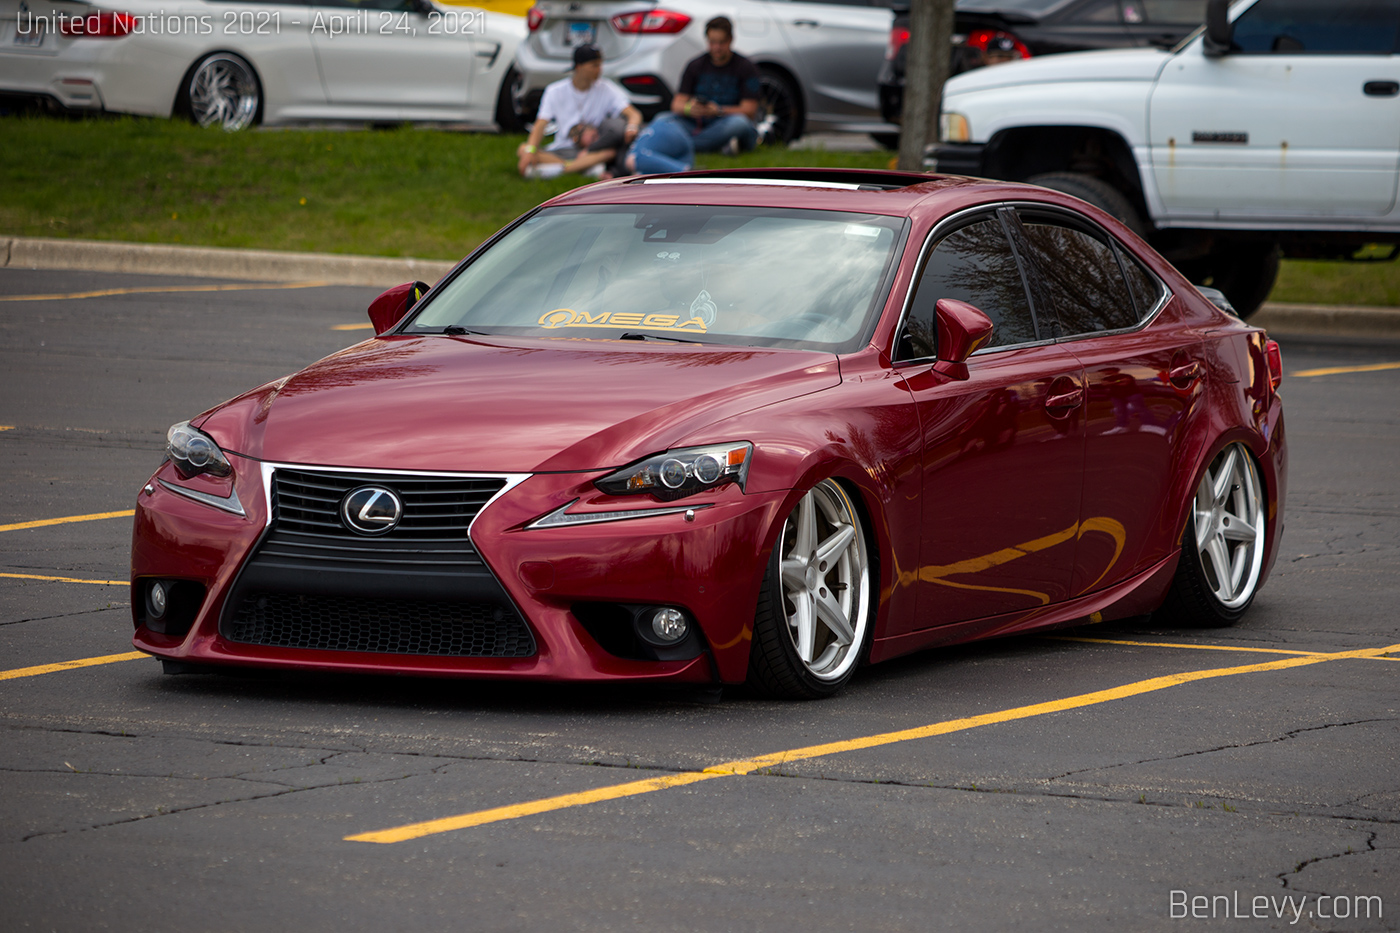 Bagged Cherry Red Lexus IS250